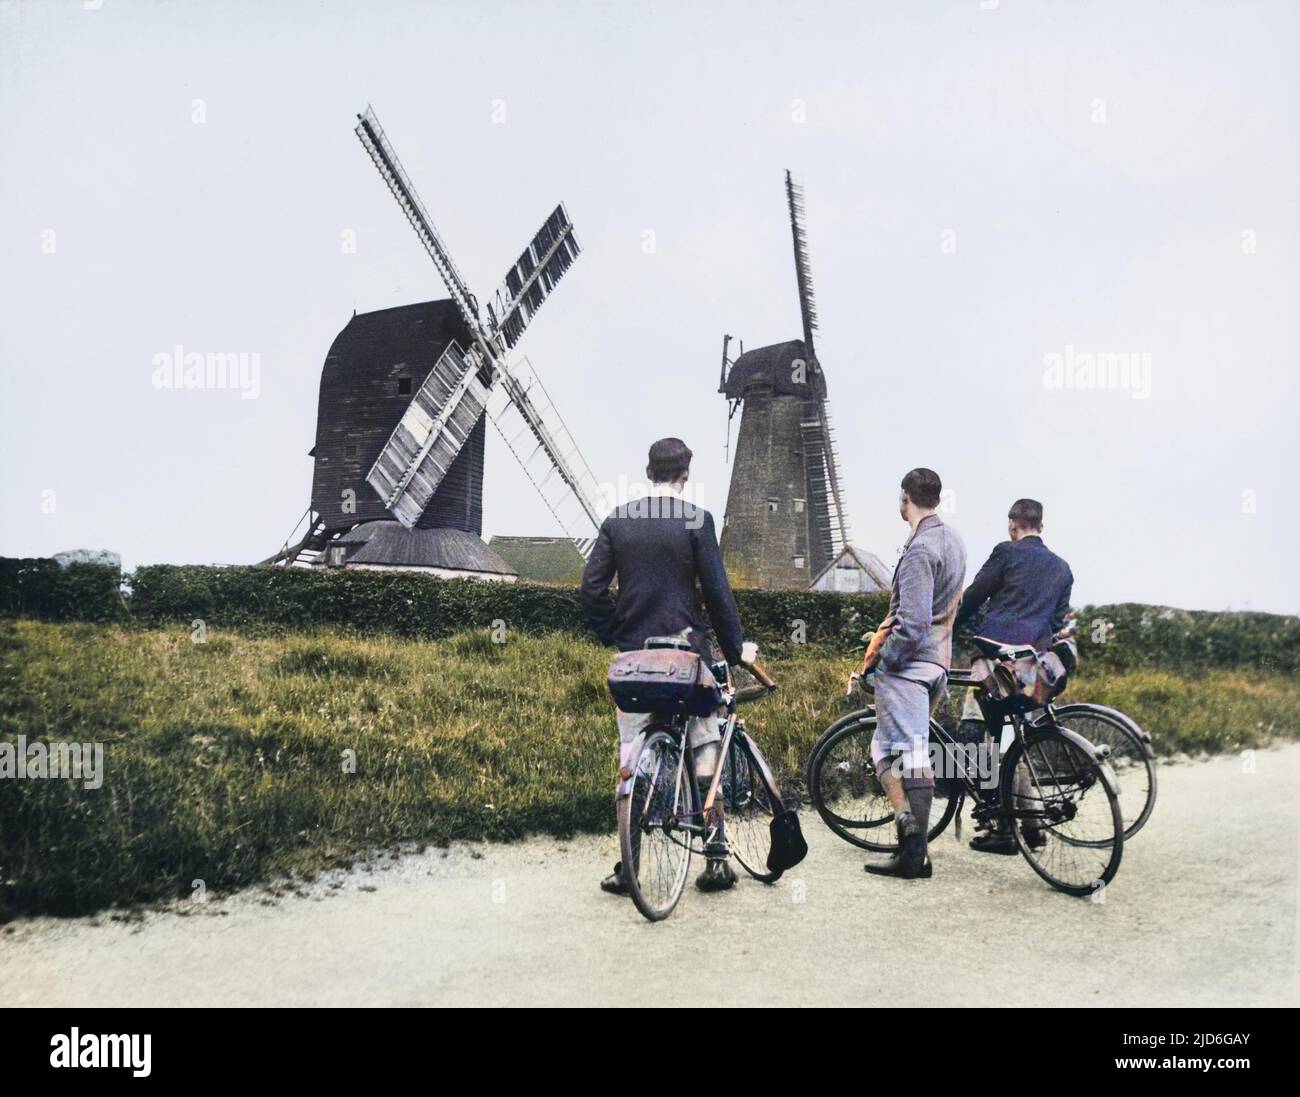 Three men cyclists admire the the two windmills at Outwood, Surrey, England. The left one was built in 1665 and still stands today. The right, built 1790, blew down in a gale 1960 Colourised version of : 10170957       Date: Oct-38 Stock Photo